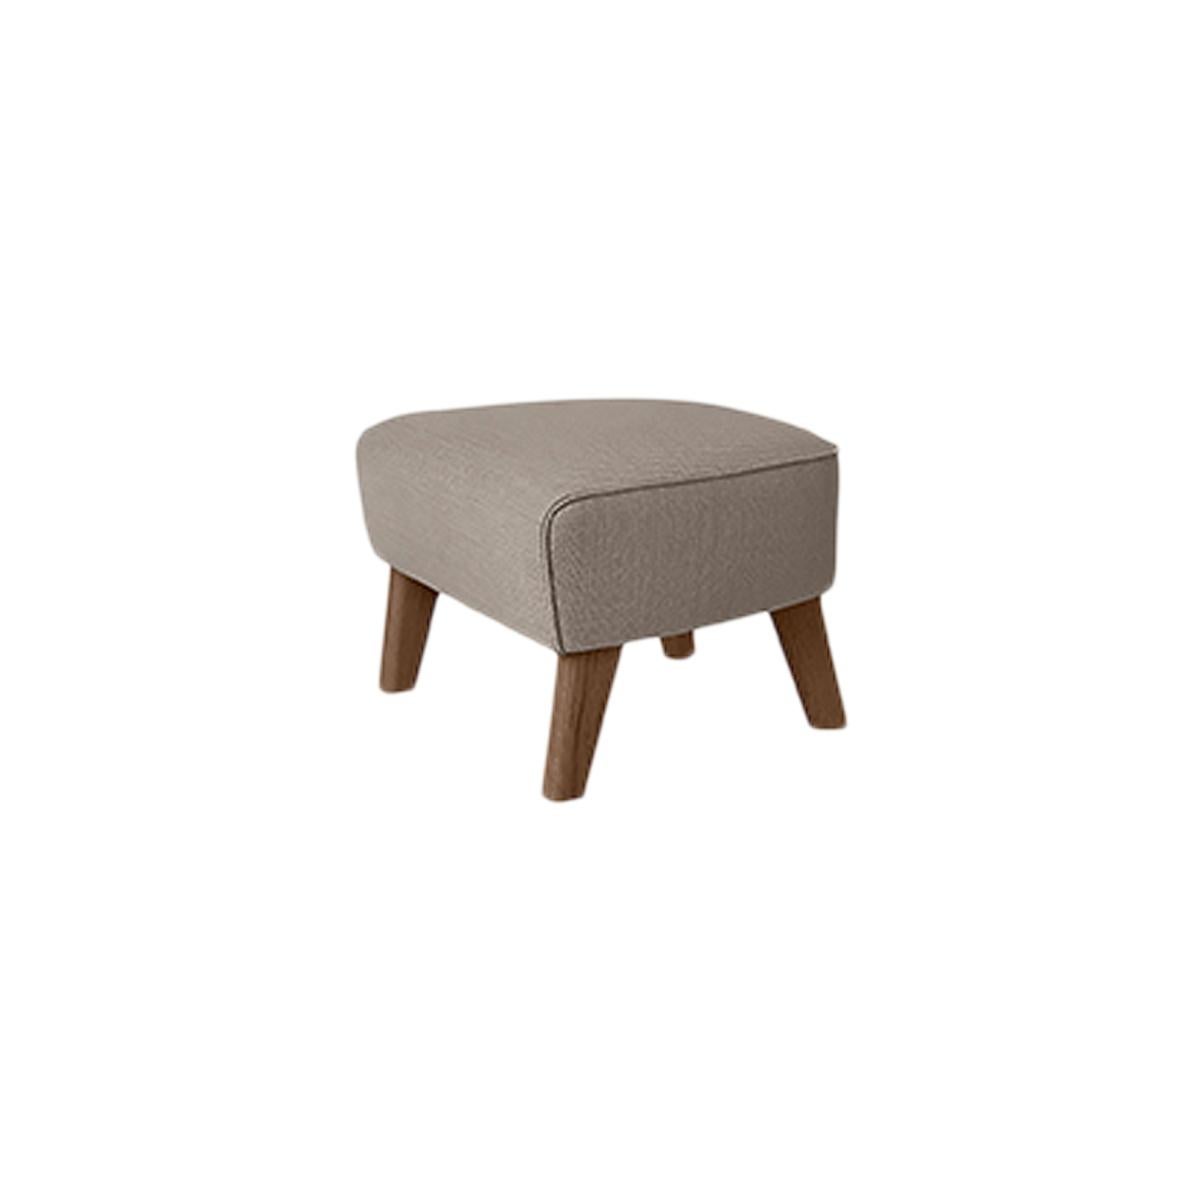 Light beige and smoked Oak Raf Simons Vidar 3 my own chair footstool by Lassen
Dimensions: w 56 x d 58 x h 40 cm 
Materials: Textile
Also Available: Other colors available.

The My Own Chair footstool has been designed in the same spirit as